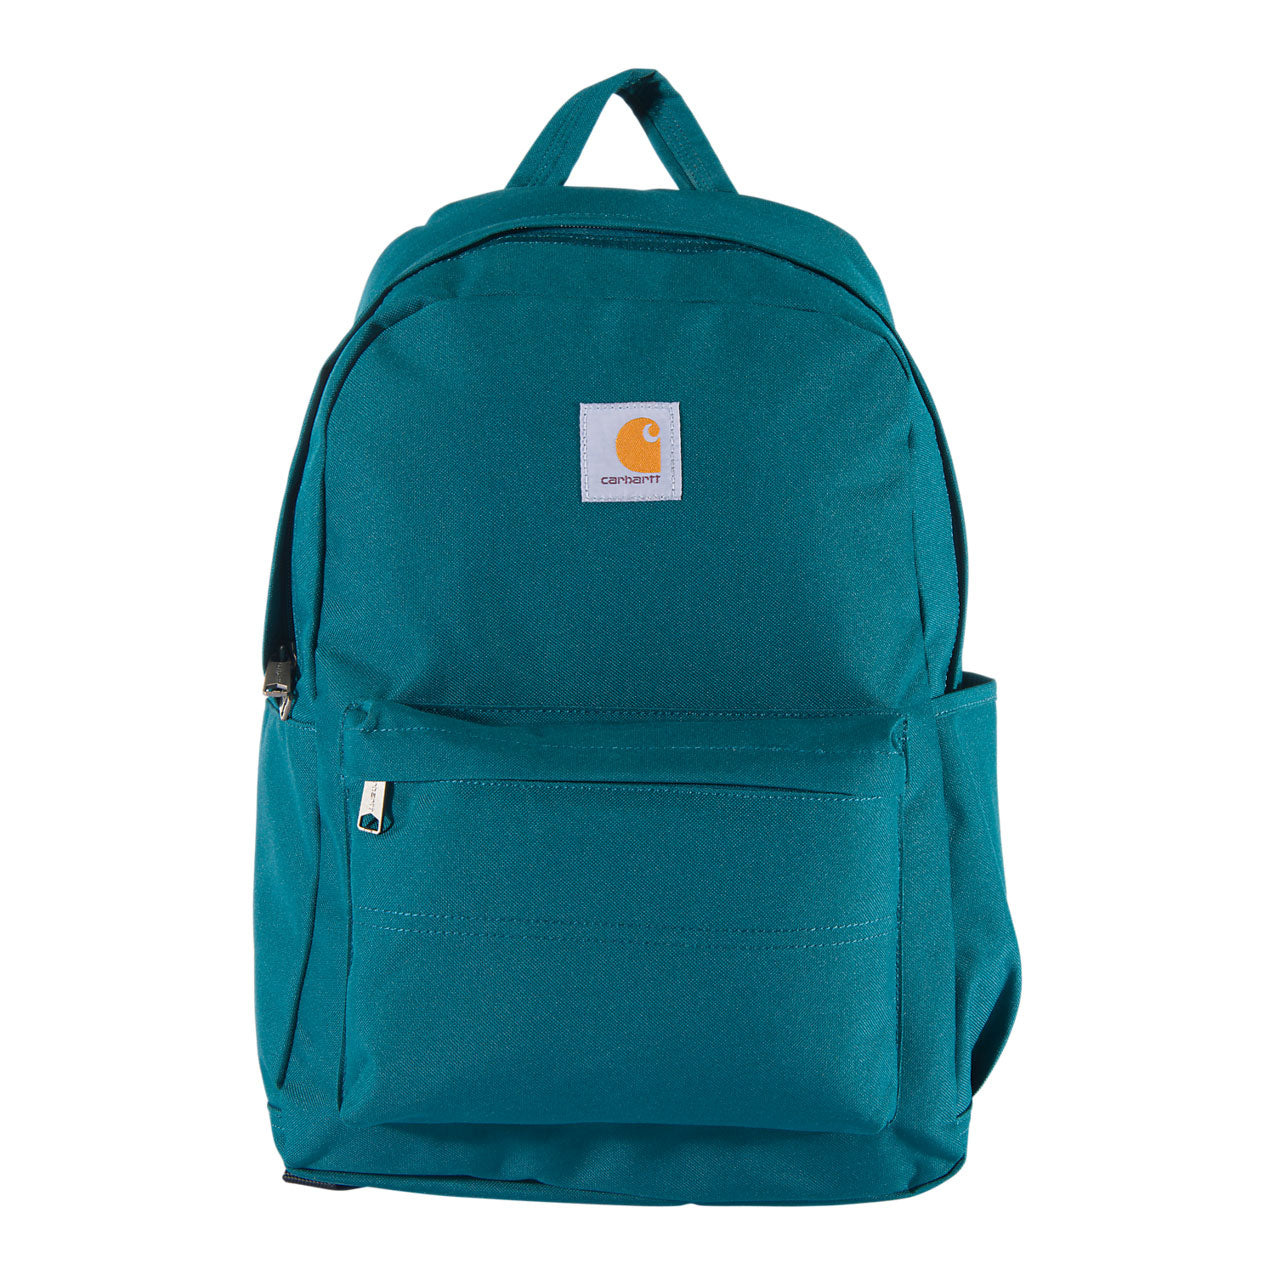 21L CLASSIC LAPTOP DAYPACK Teal Blue